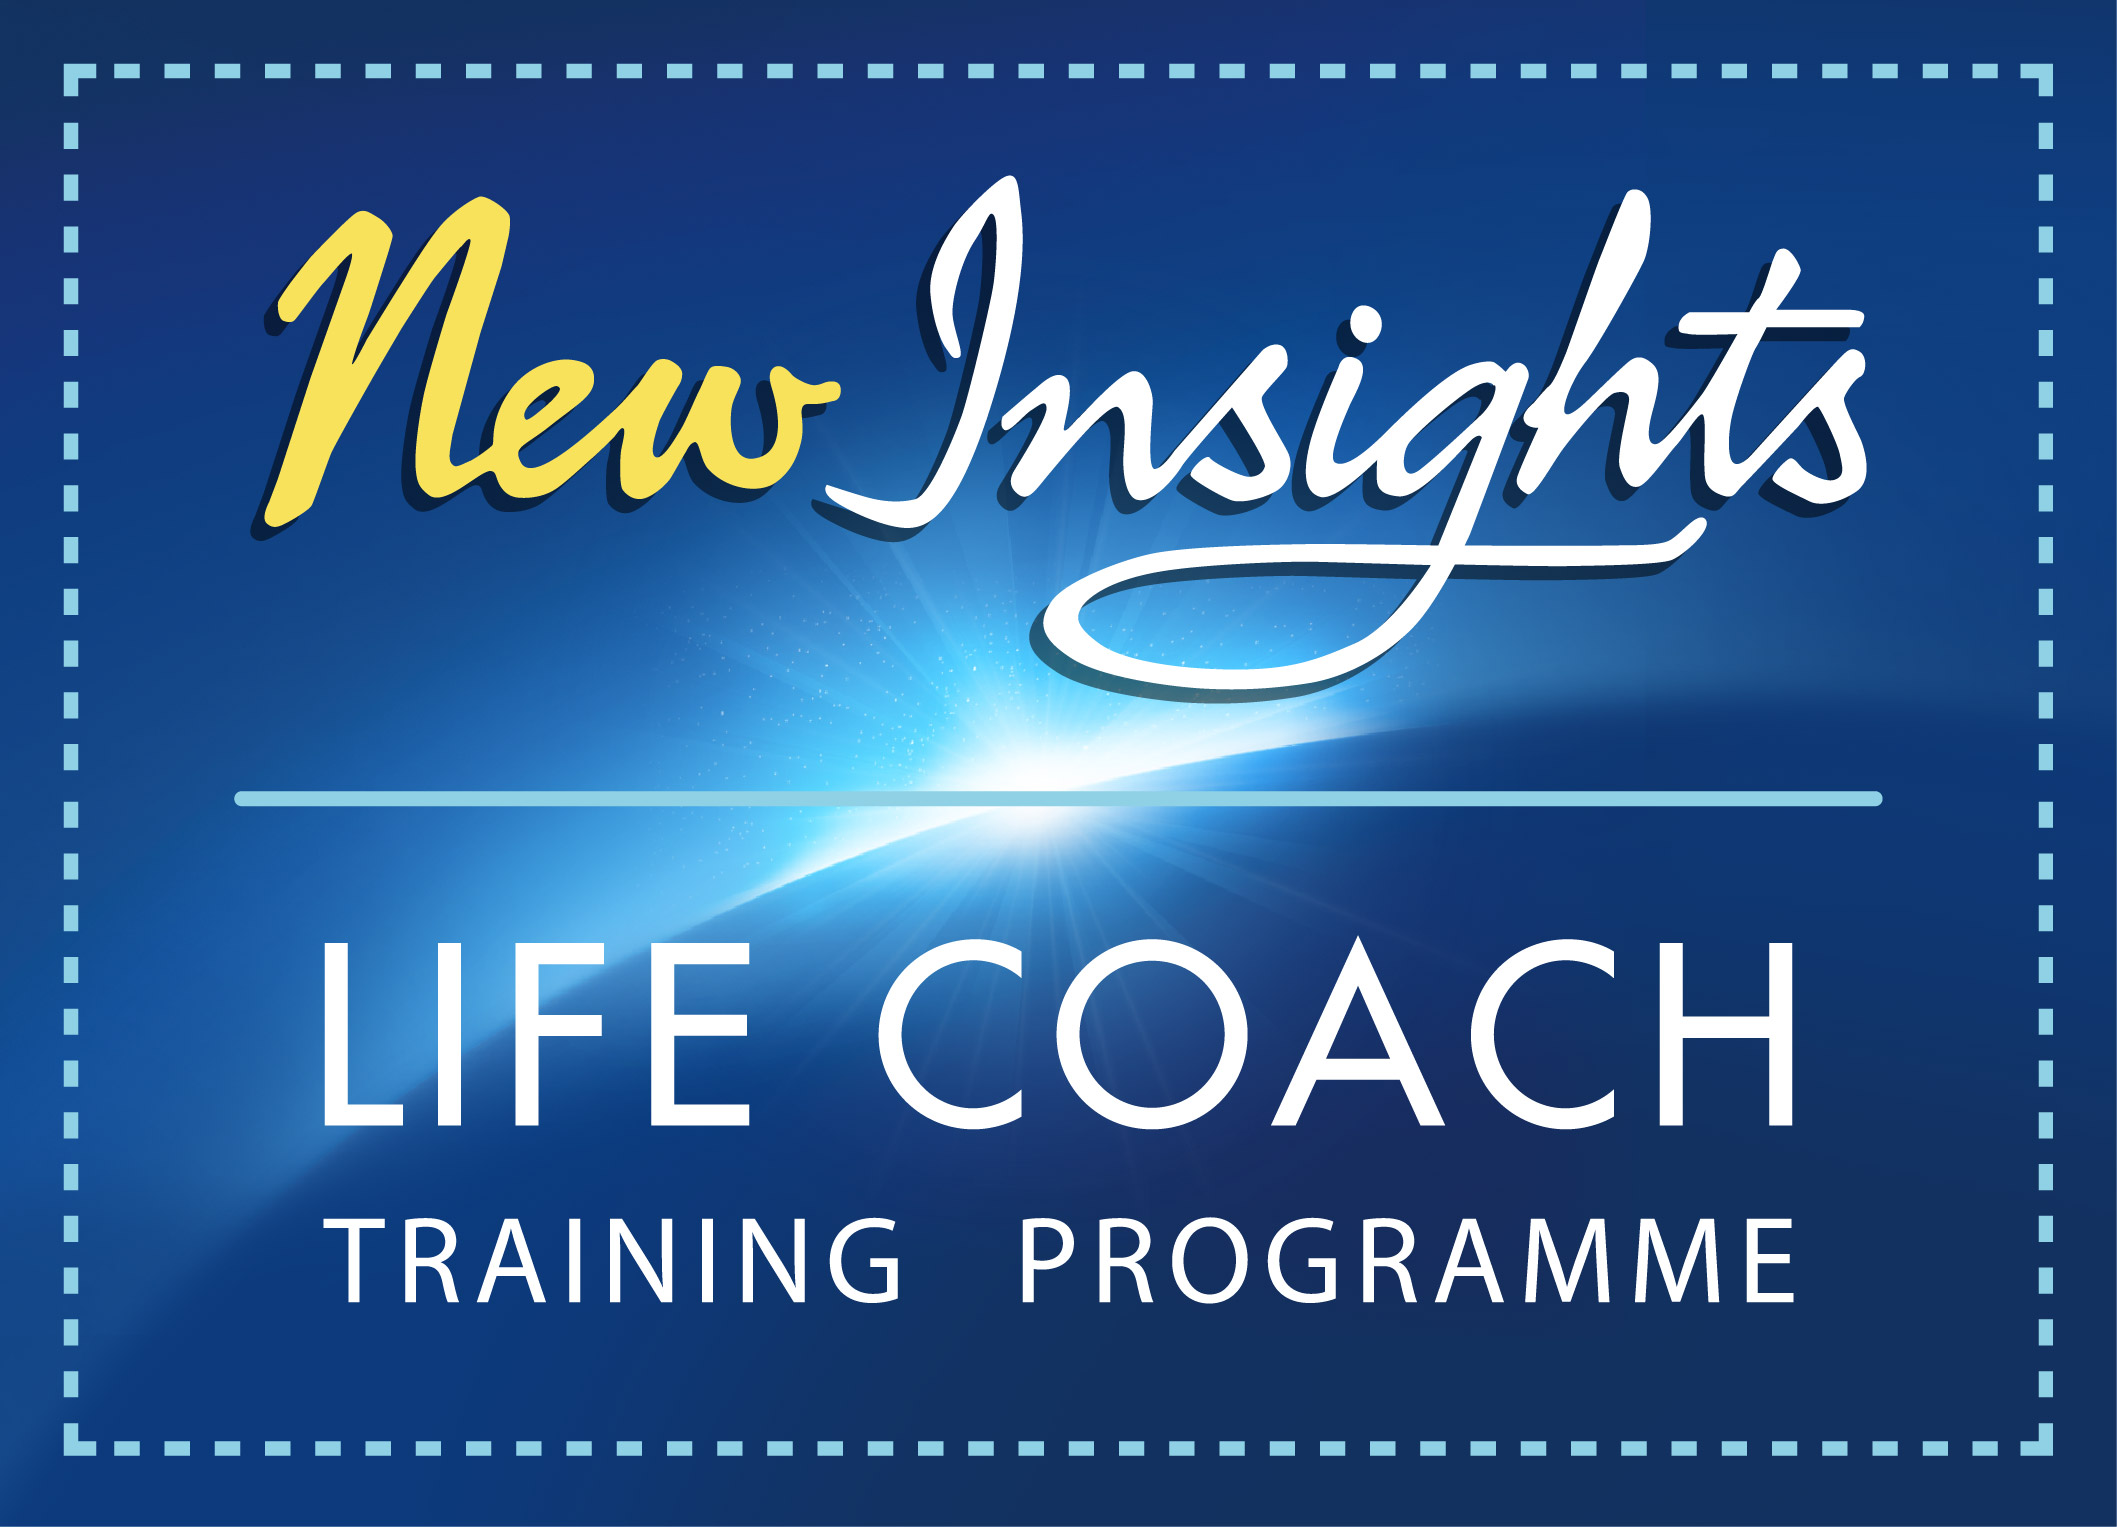 New Insights Life Coach Training & Certification Programme logo